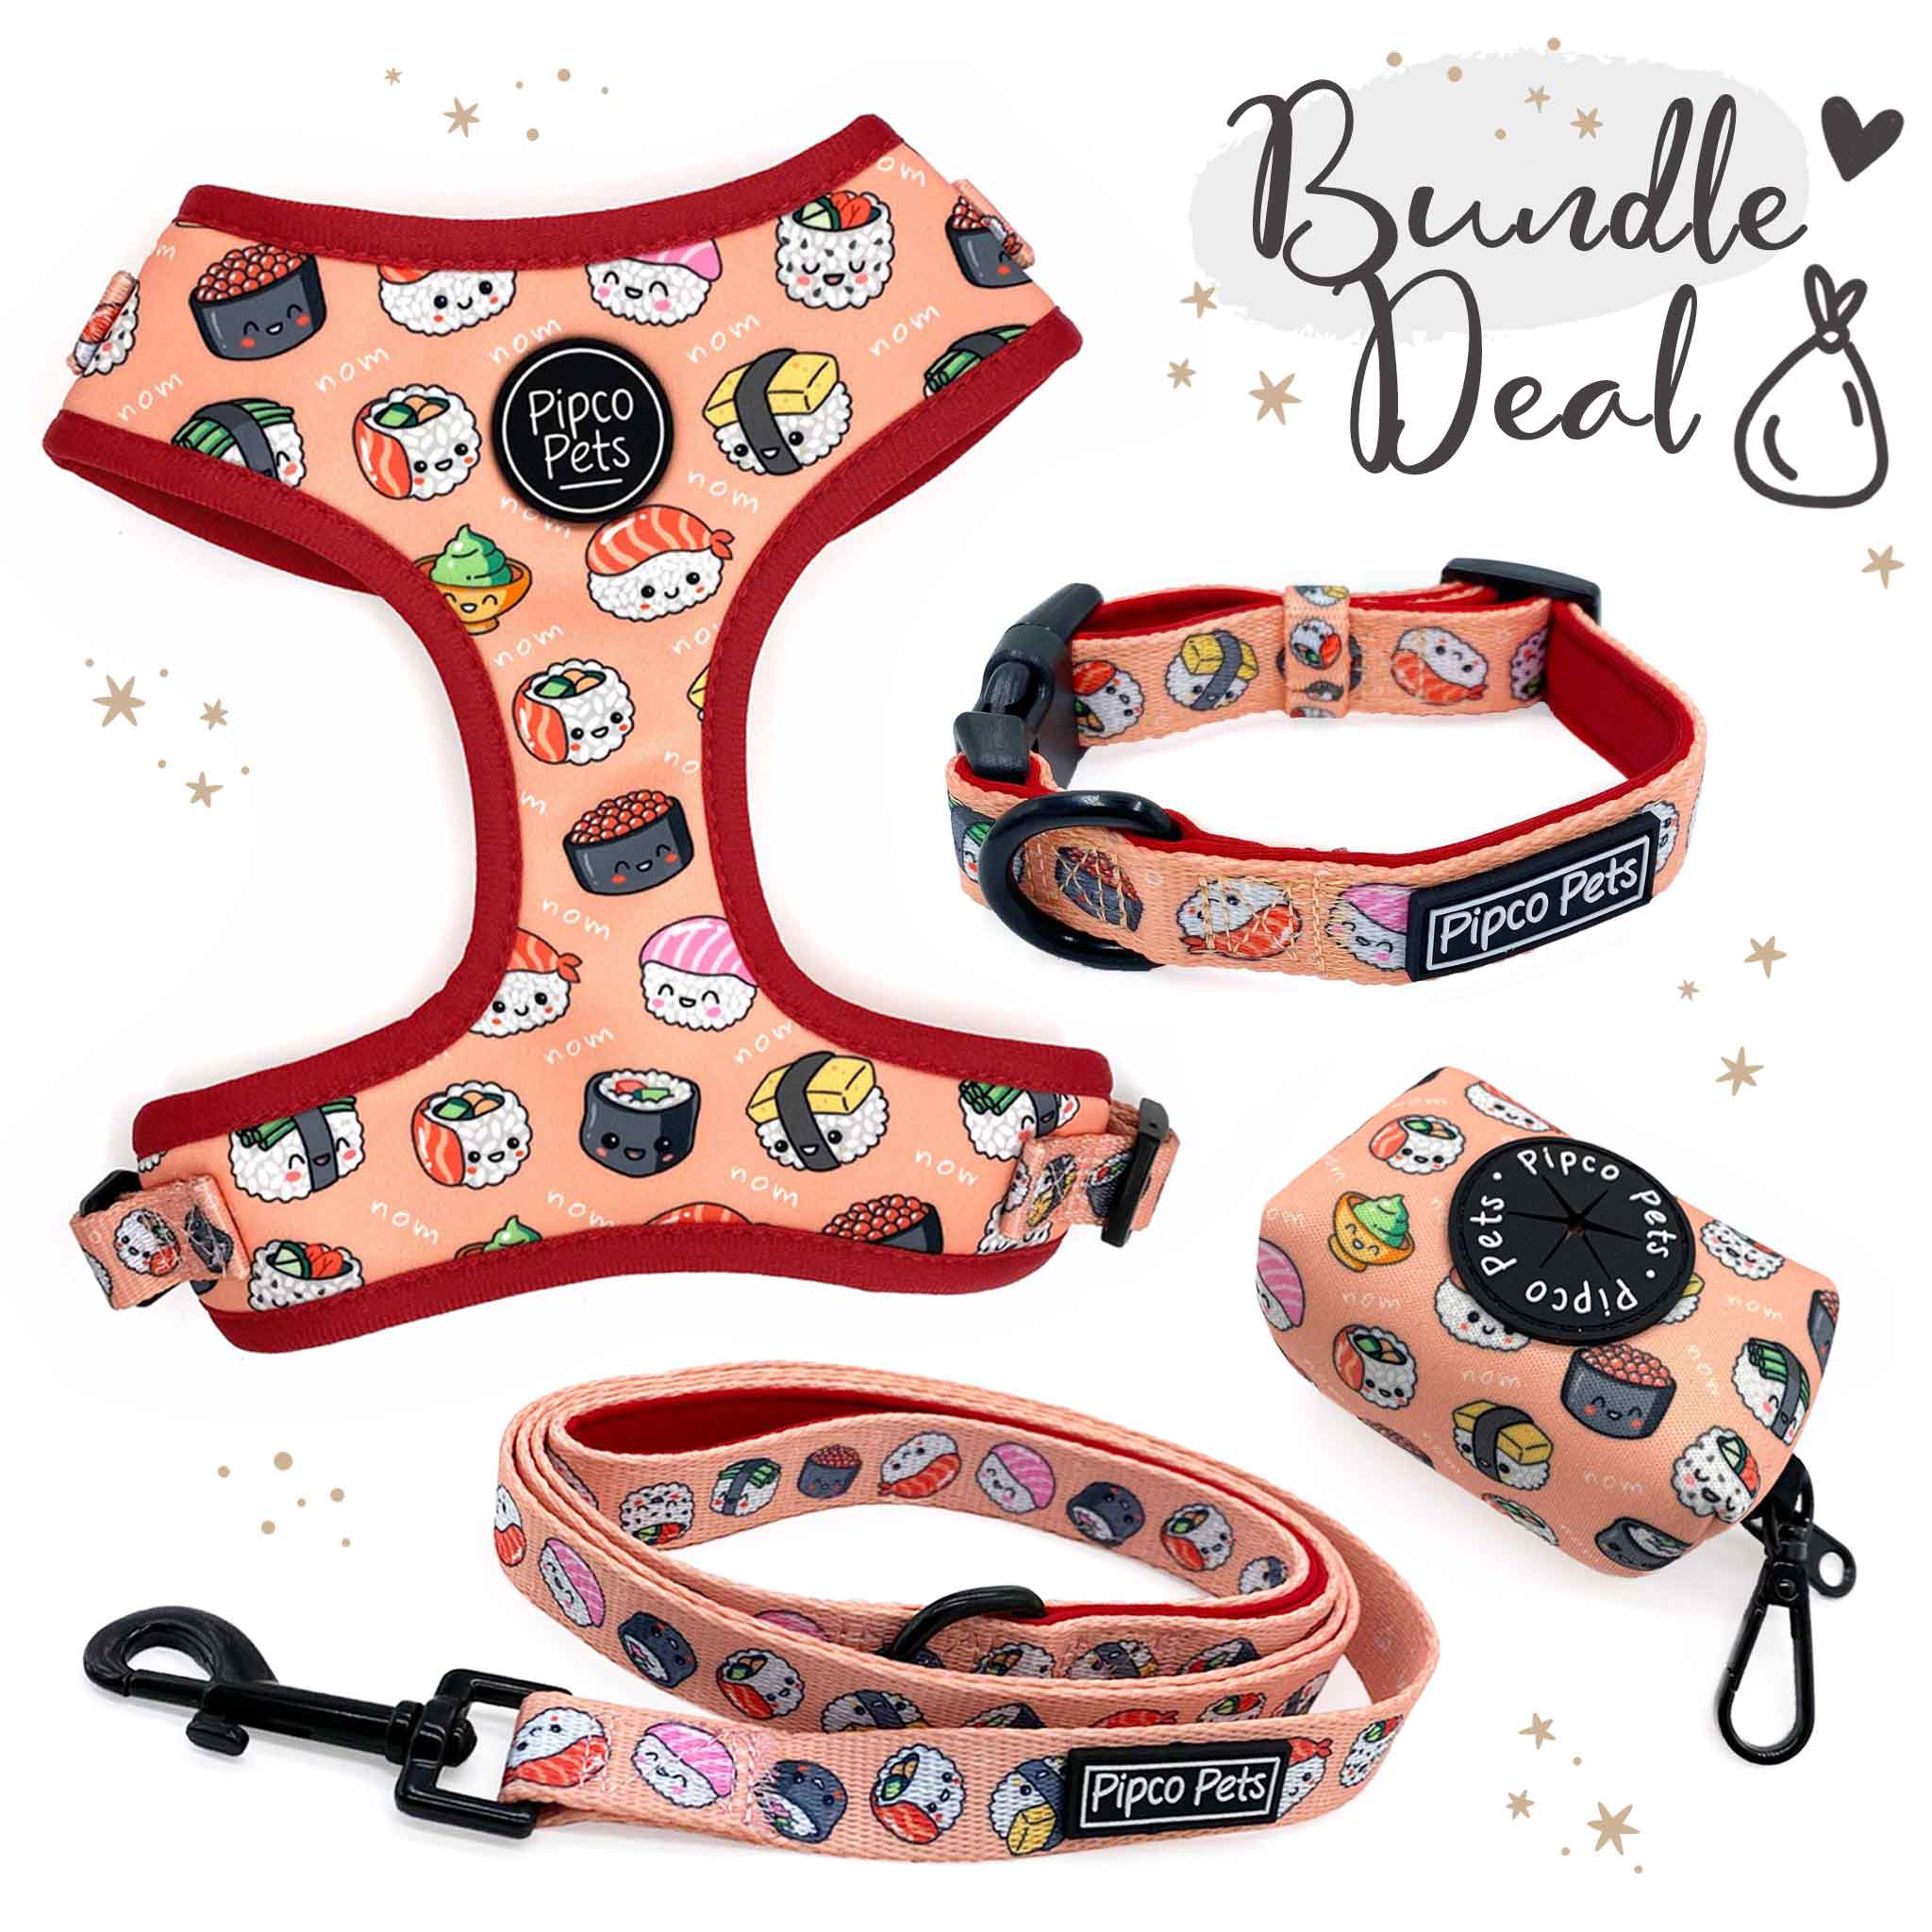 Bundle set including Pipco Pets dog harness, collar, lead, and poo bag dispenser with matching Sushi Train print in pink